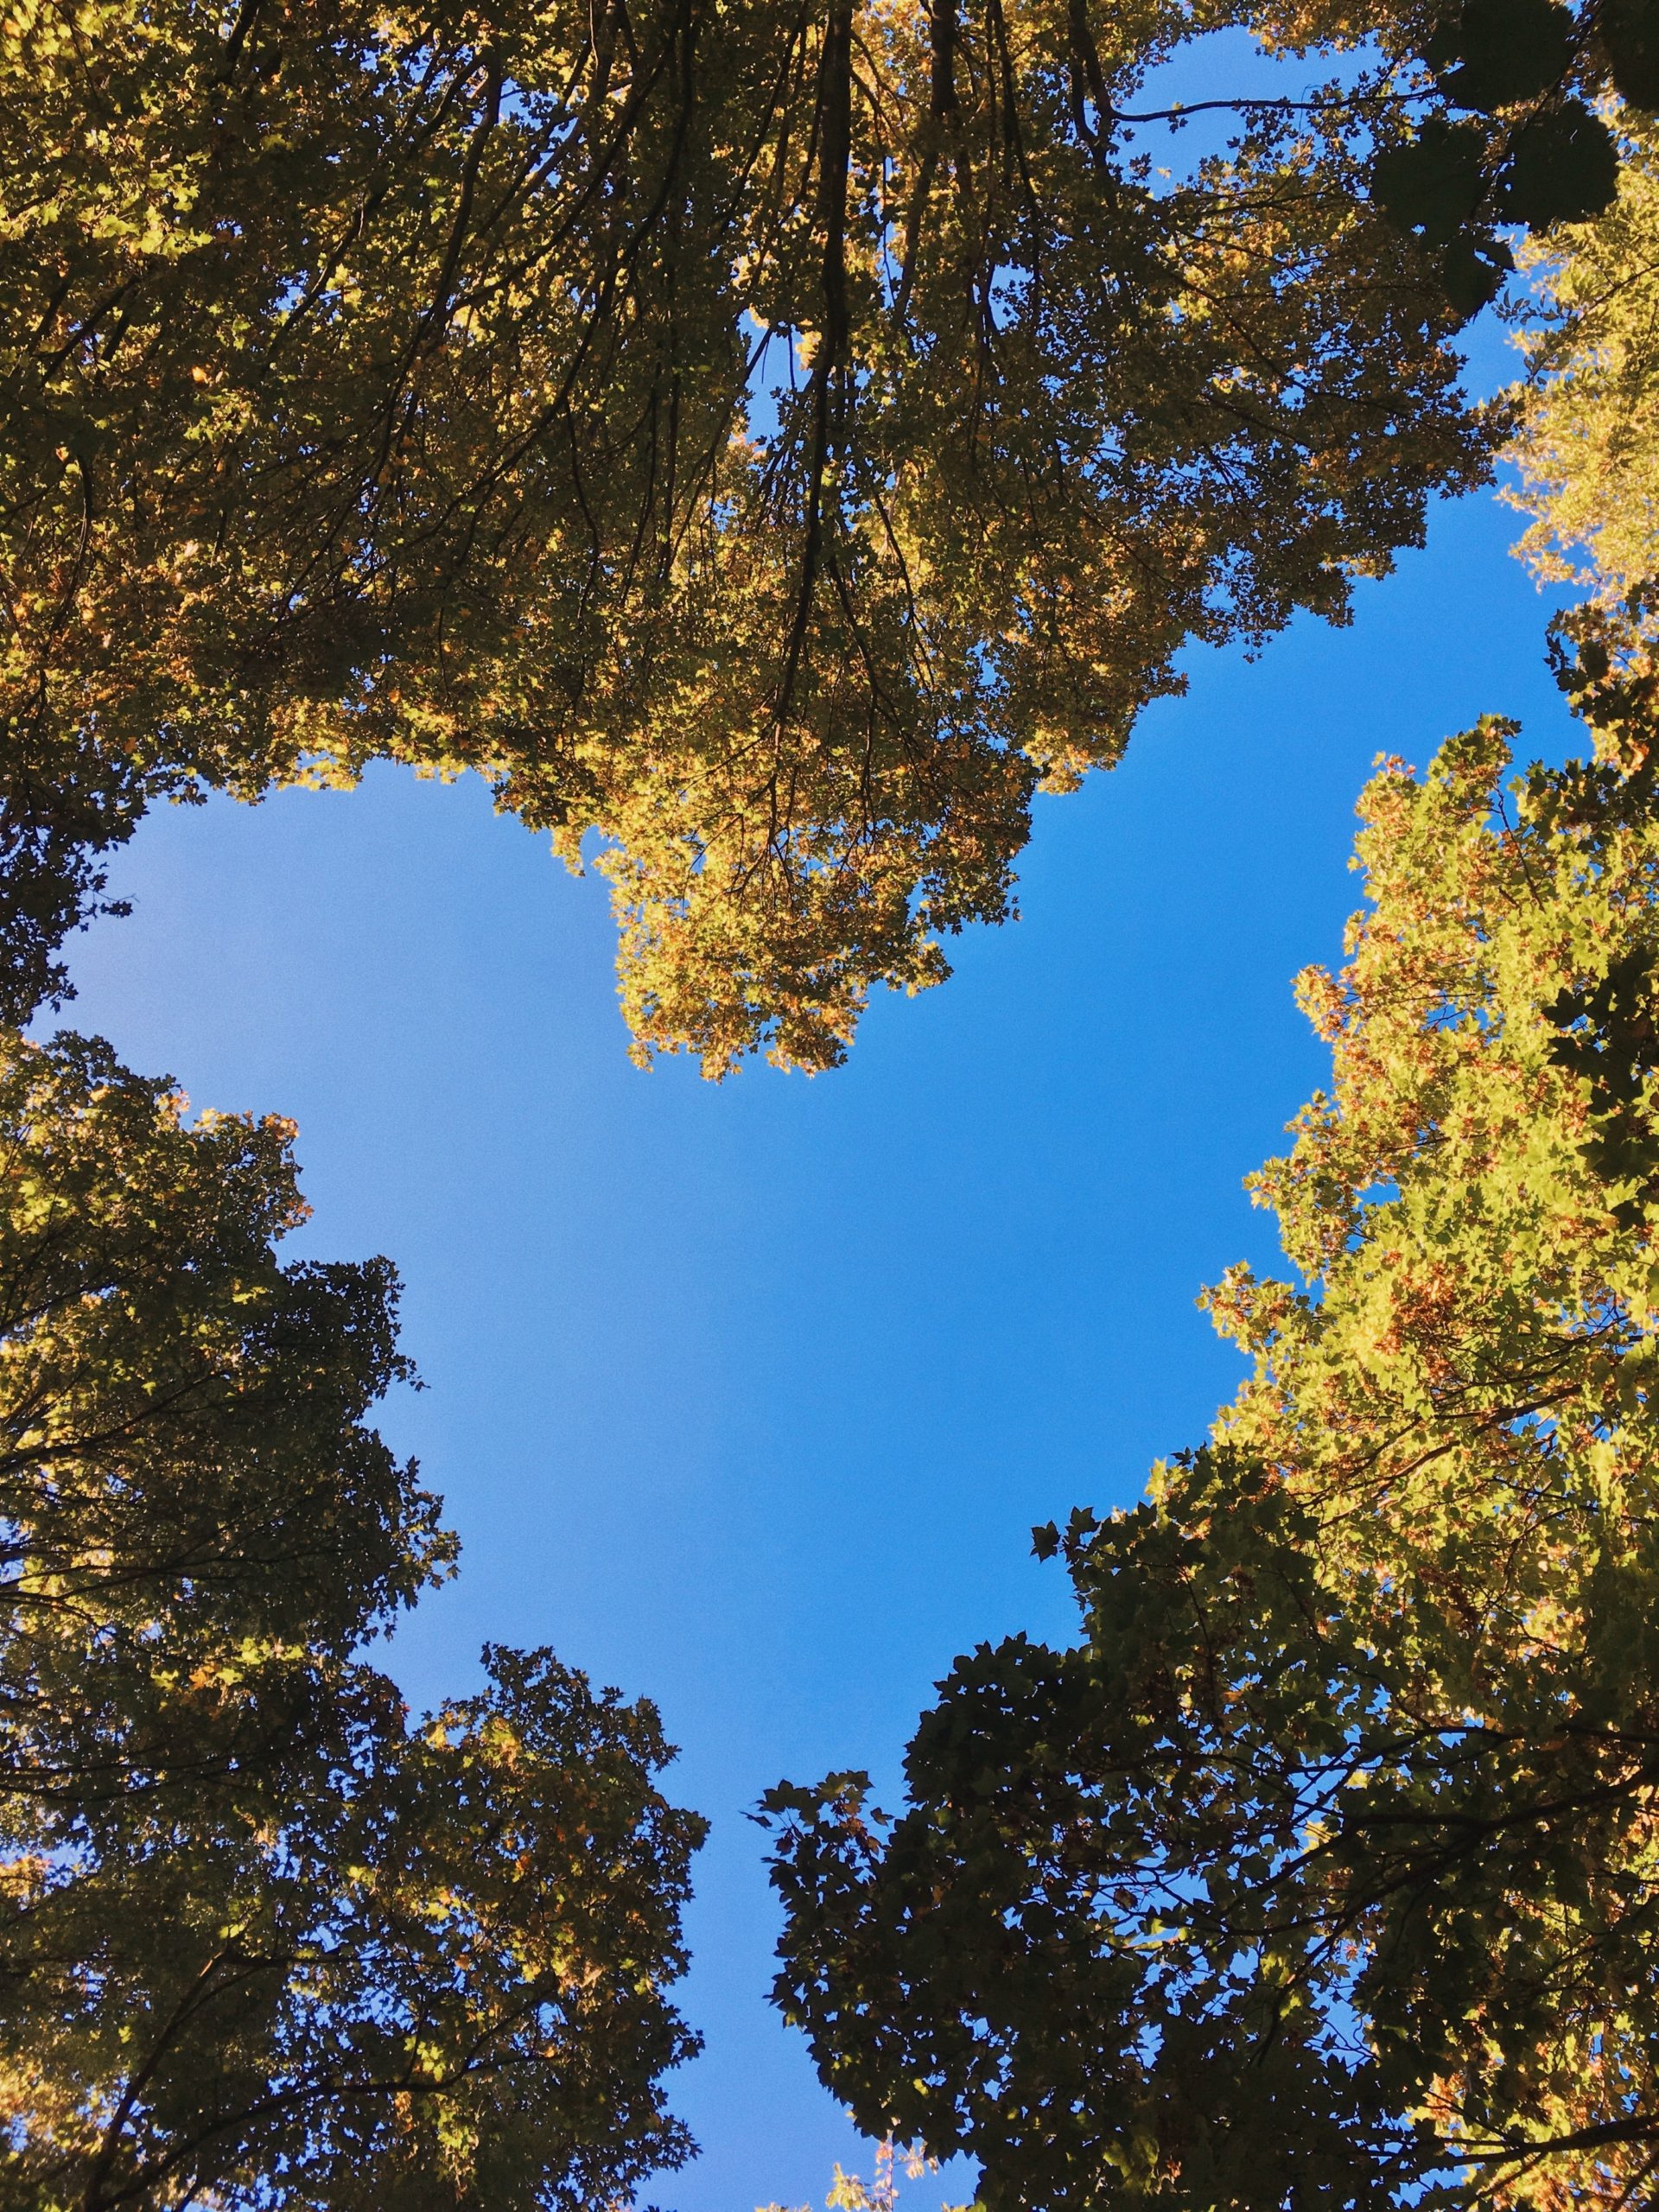 A grove of trees that, viewed from the ground, creates the shape of a heart.